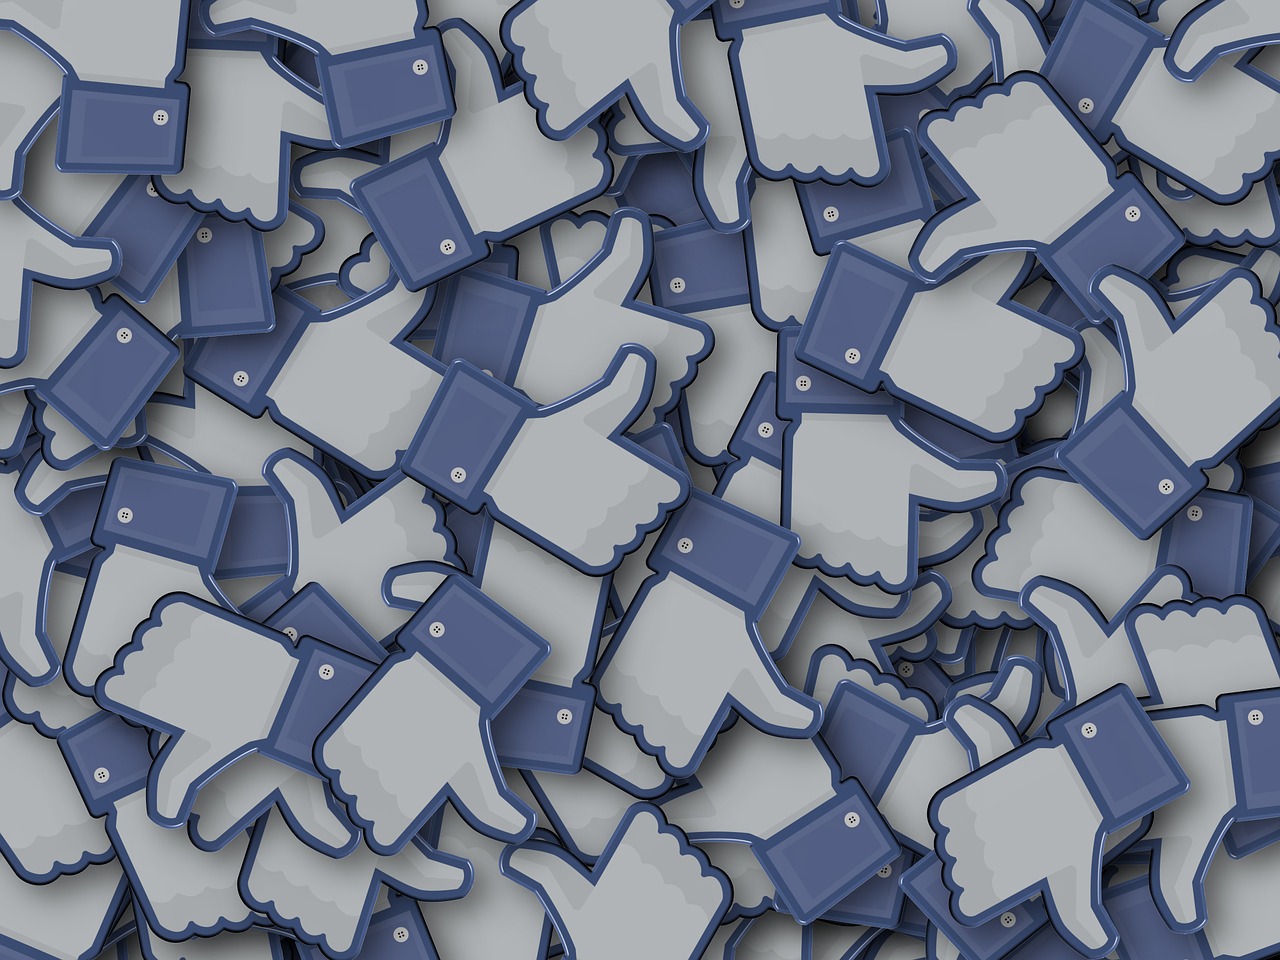 Facebook presents the Widely Viewed Content Report